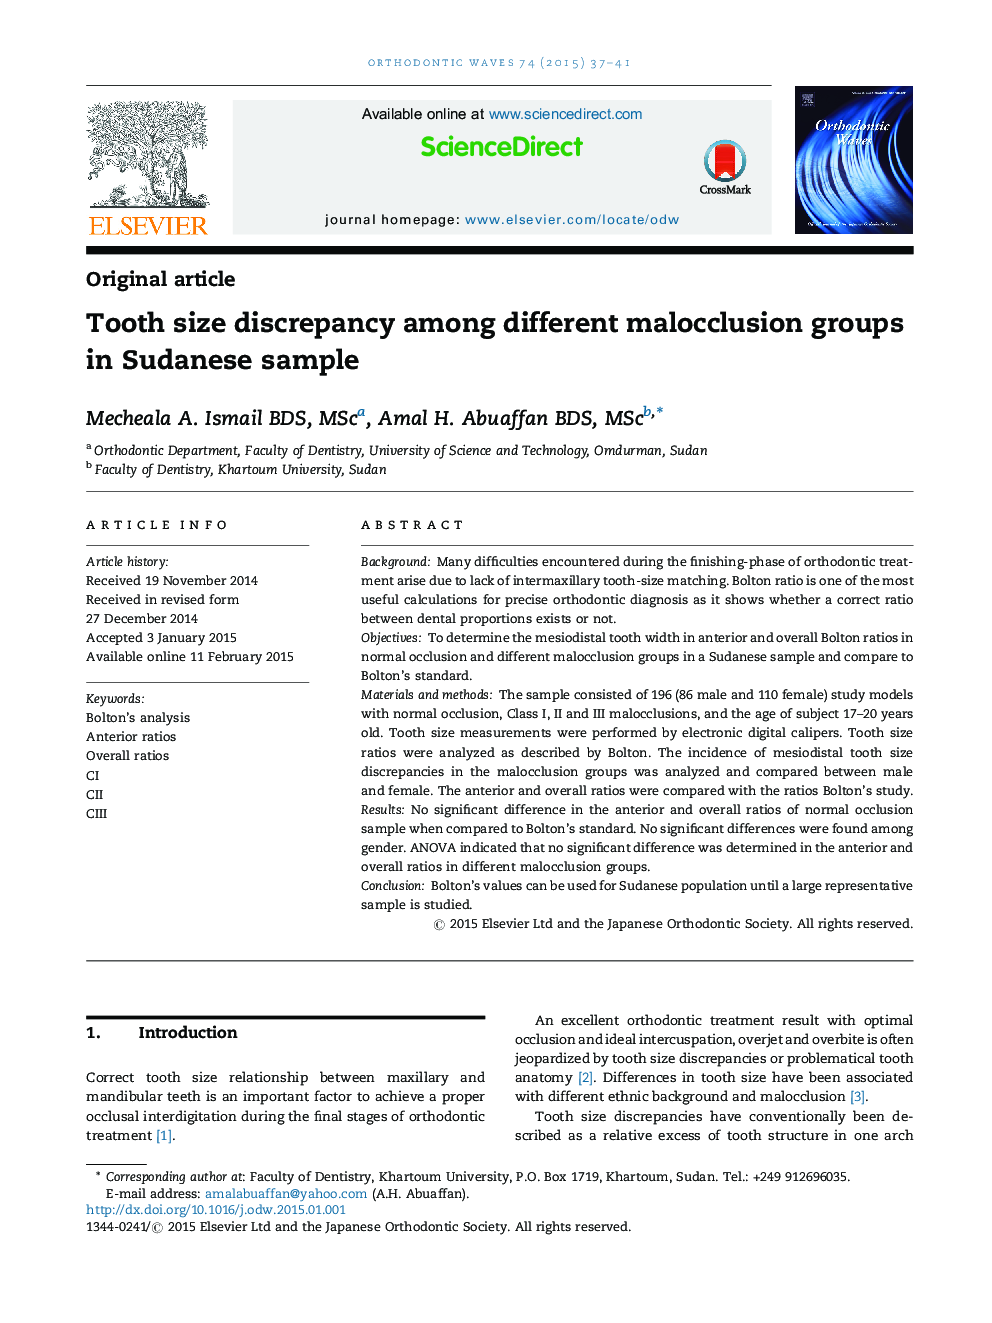 Tooth size discrepancy among different malocclusion groups in Sudanese sample